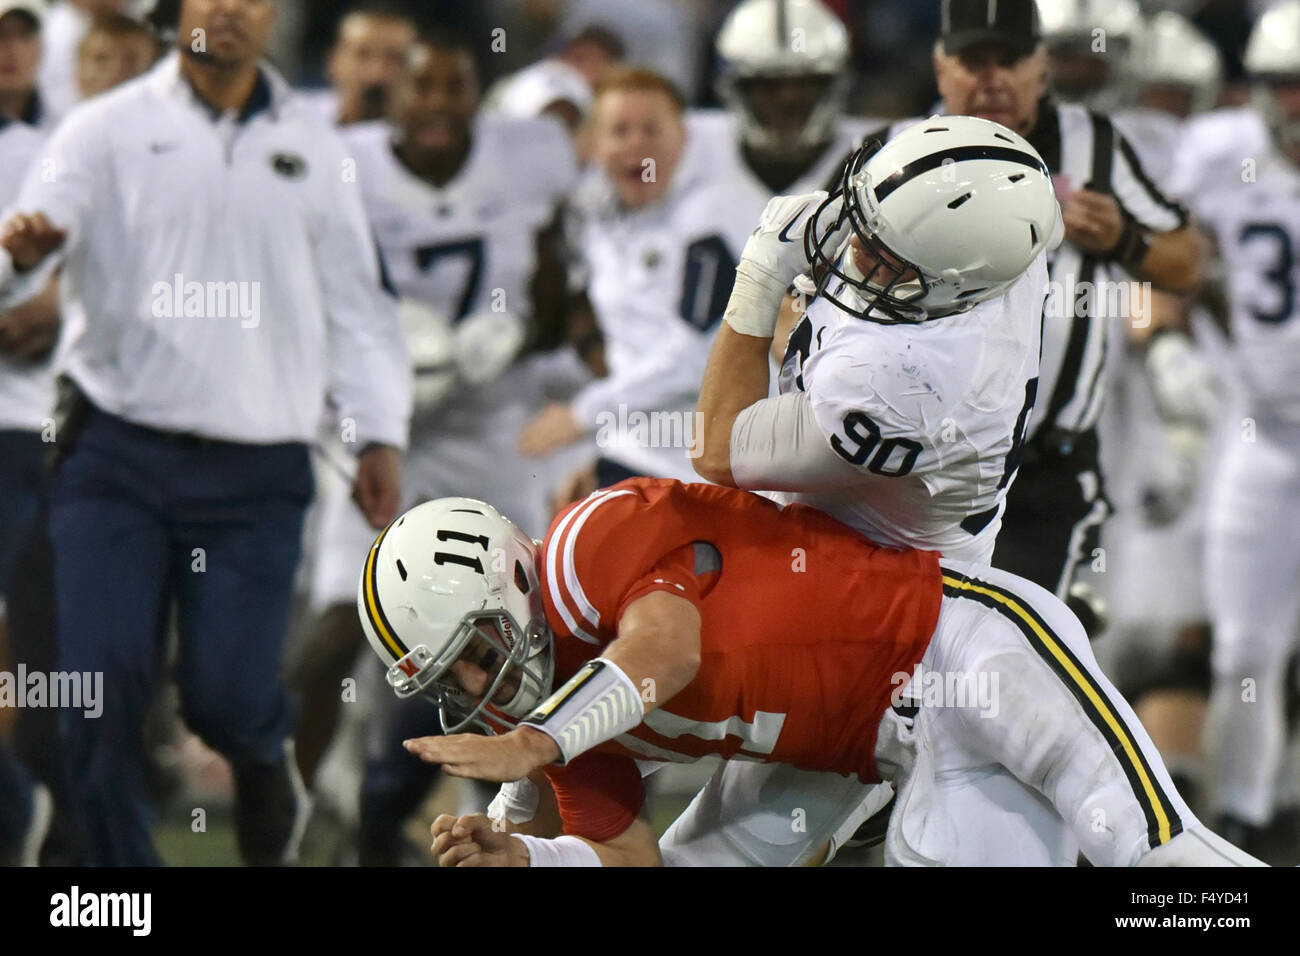 Baltimore, Maryland, USA. 24th Oct, 2015. Penn State Nittany Lions defensive end GARRETT SICKLES (90) is tackled by Maryland Terrapins quarterback PERRY HILLS (11) during the Big 10 conference football game at M&T Bank Stadium in Baltimore, MD. Penn State won 31-30. © Ken Inness/ZUMA Wire/Alamy Live News Stock Photo